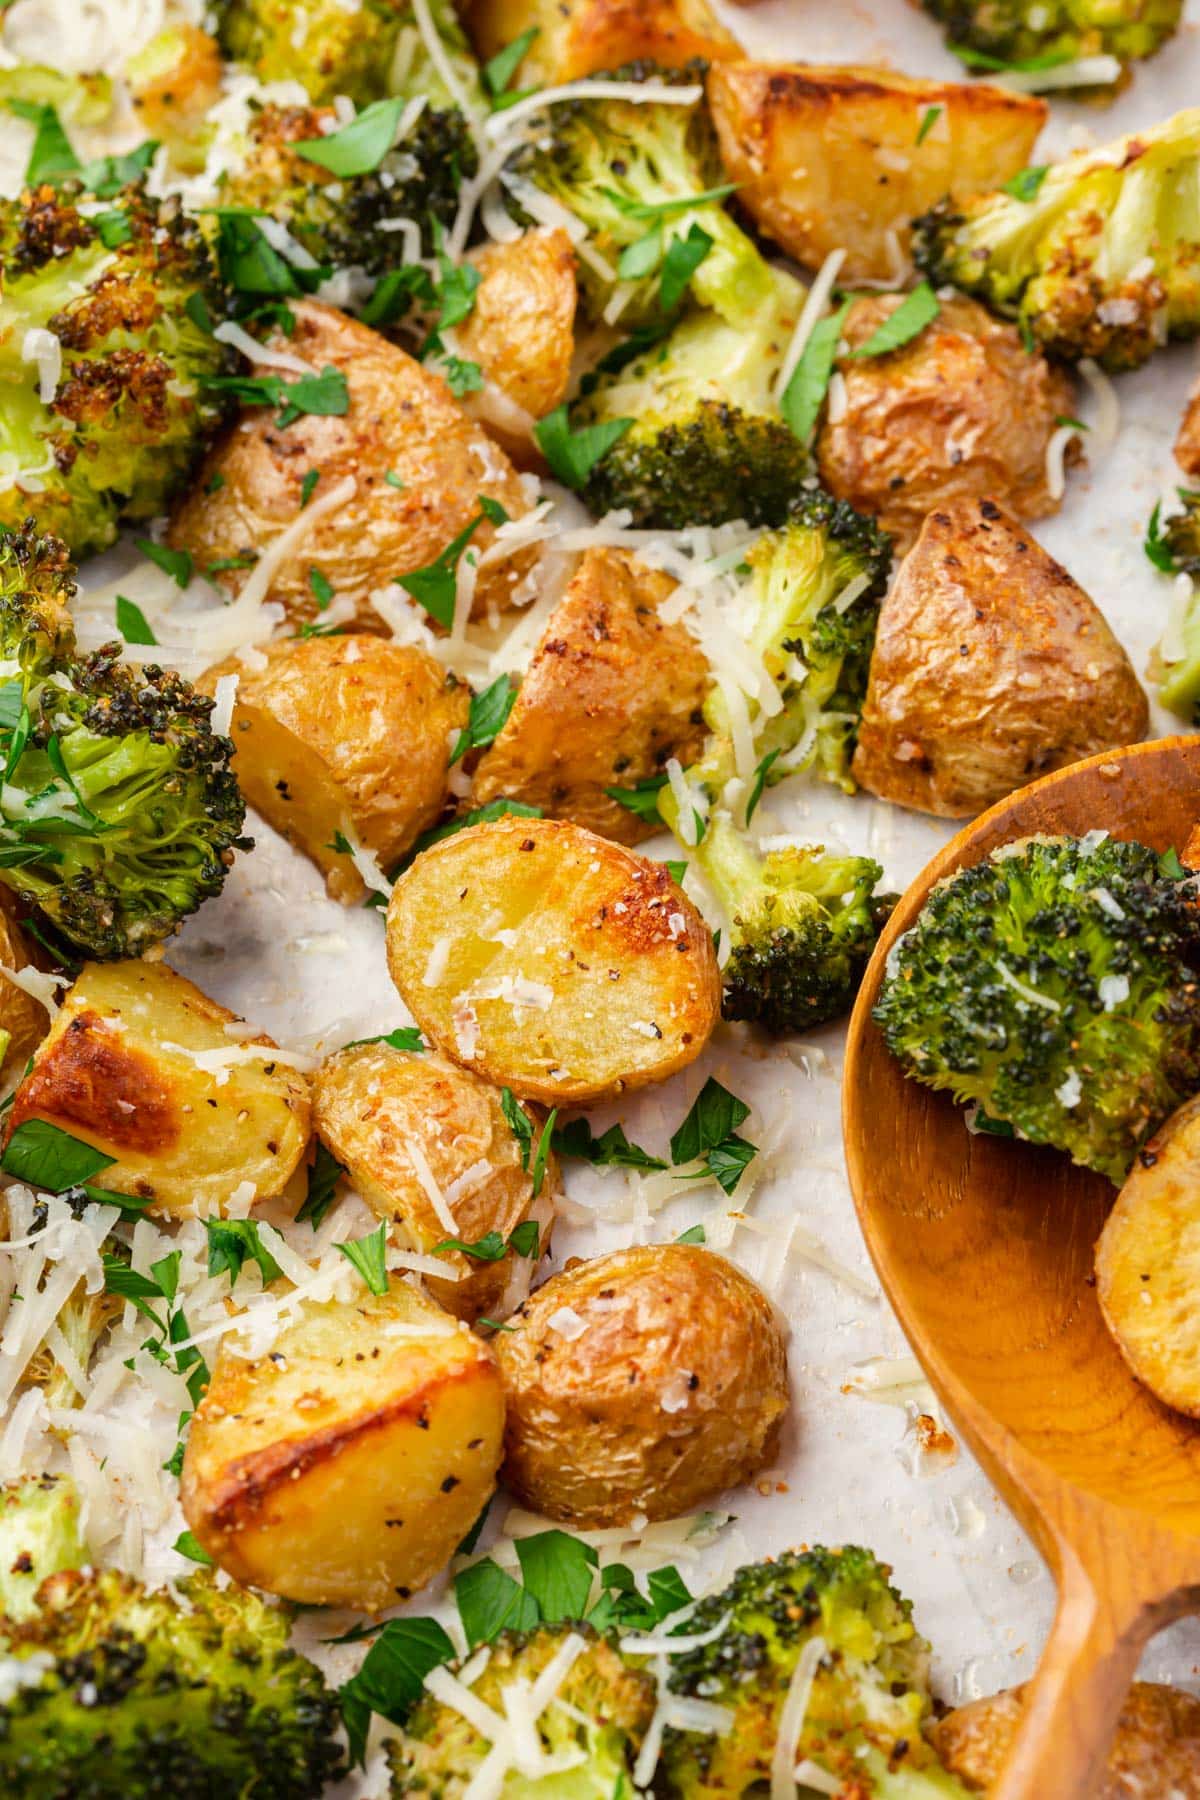 Drool-Worthy: 20 Easy Gluten-Free, Dairy-Free Side Dishes You'll Love!